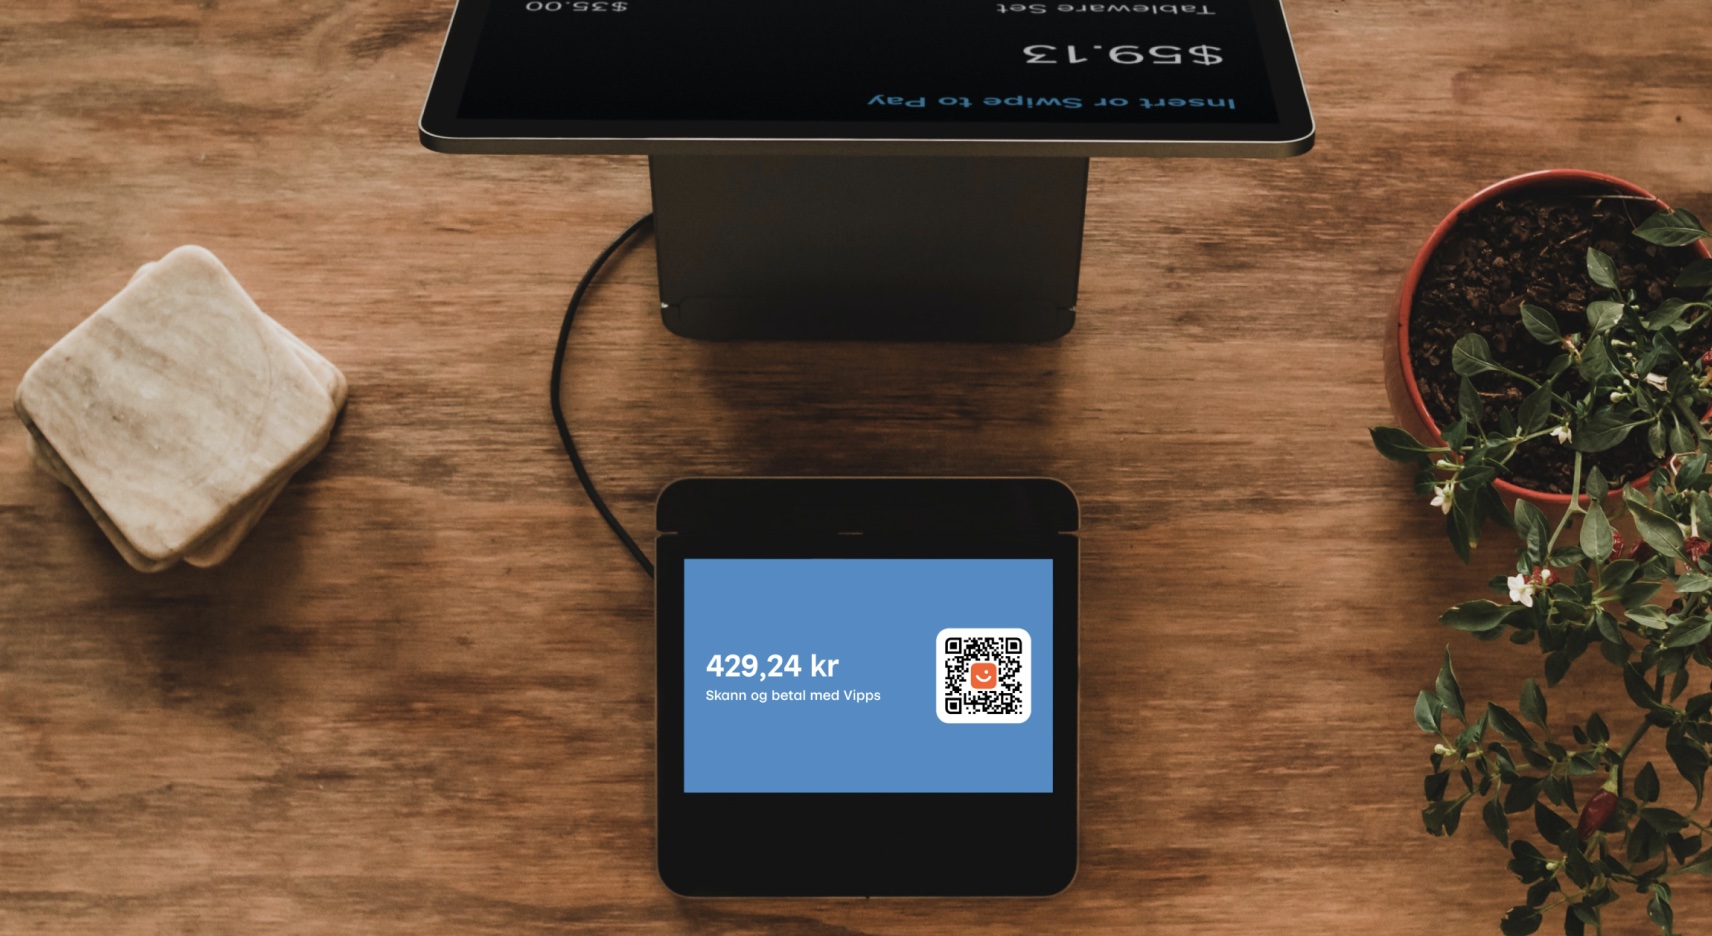 One-time payment QR